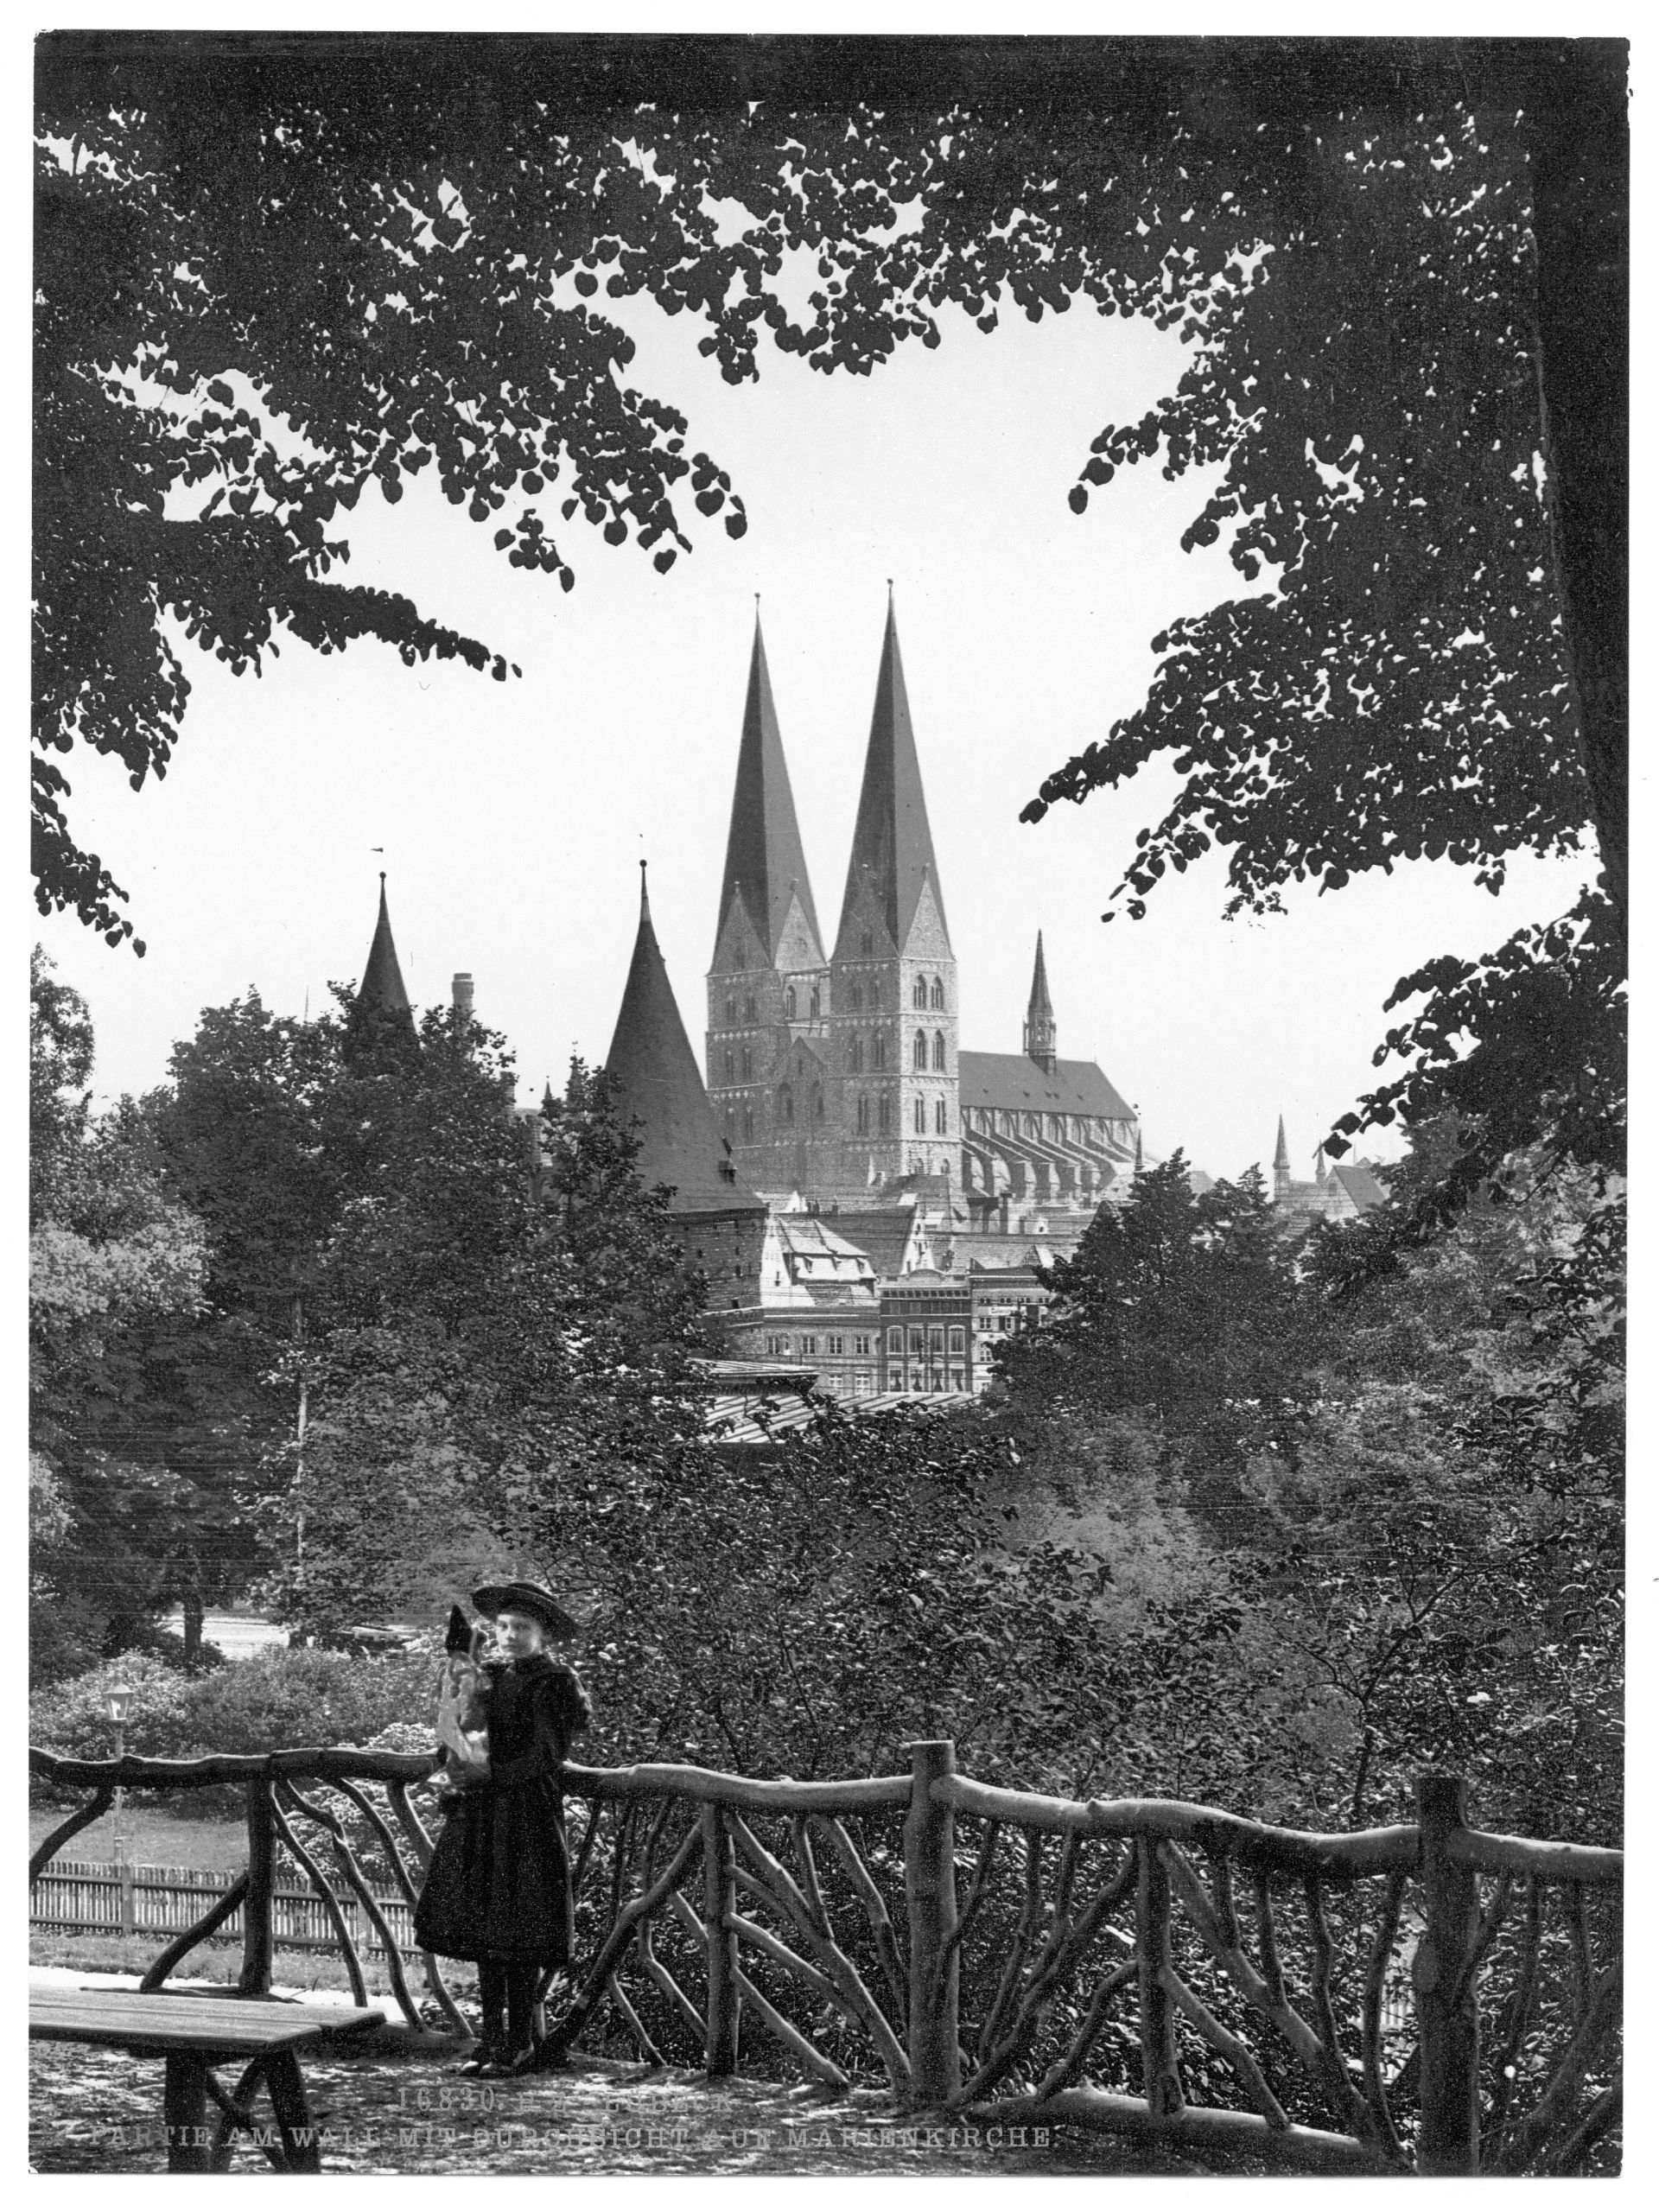 View from wall towards Mary's Church, Lubeck, Germany (1890s)